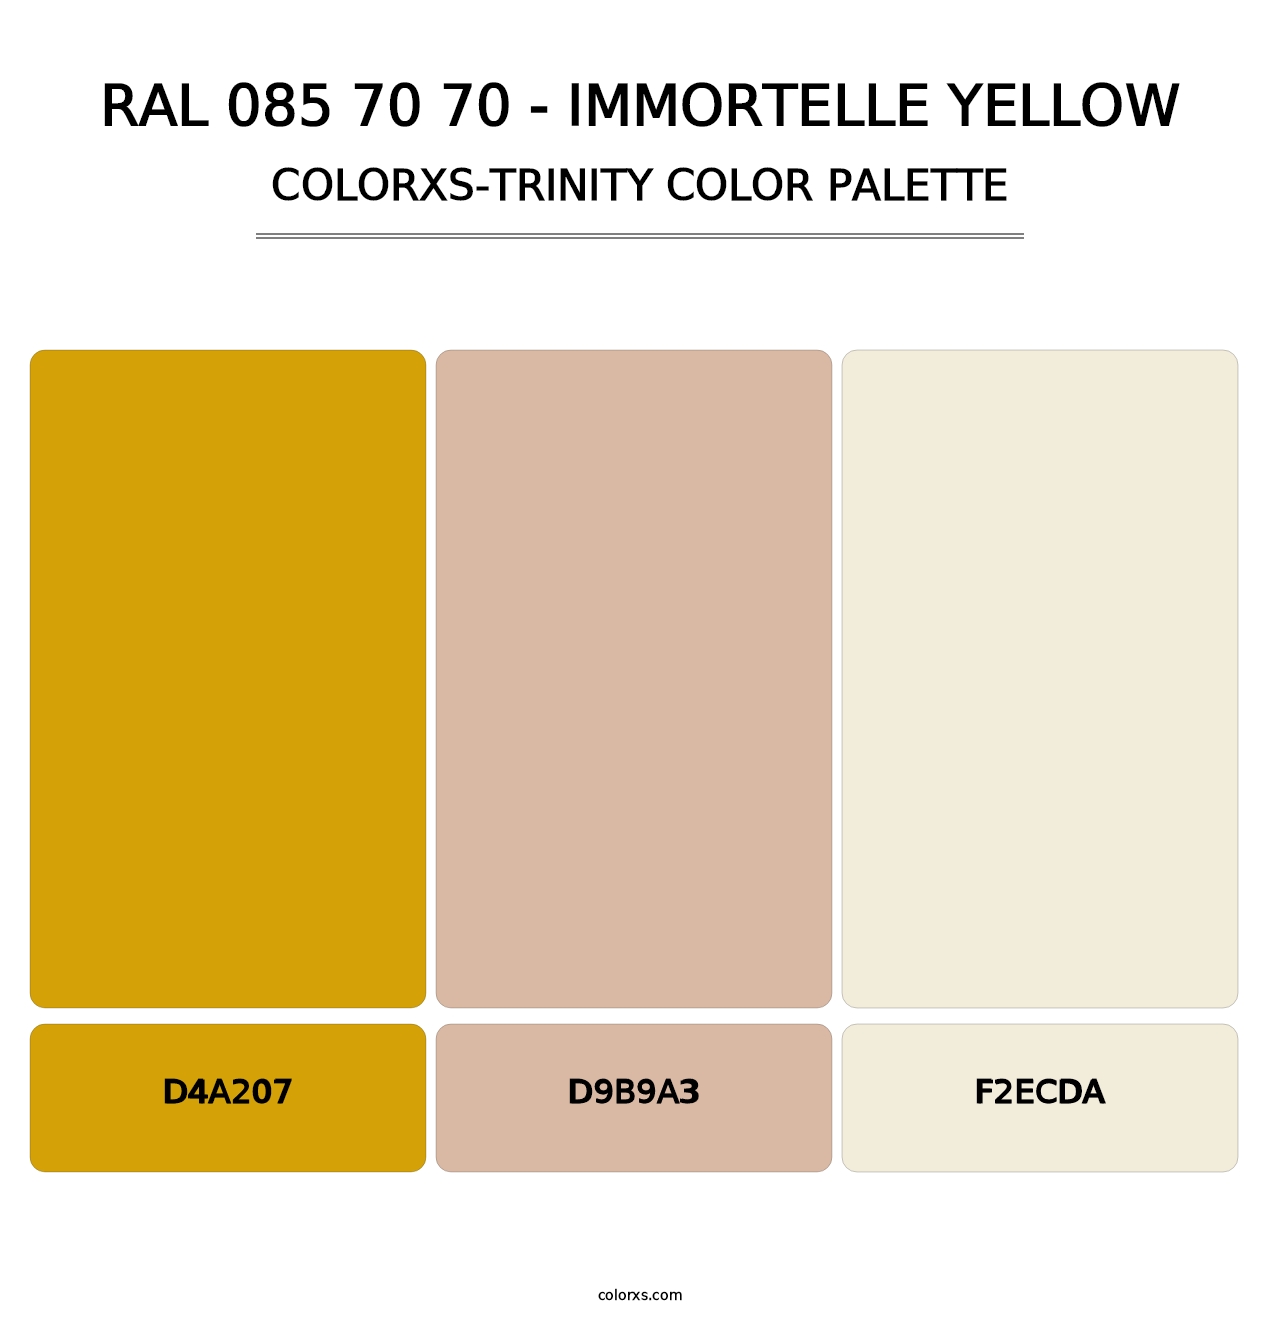 RAL 085 70 70 - Immortelle Yellow - Colorxs Trinity Palette